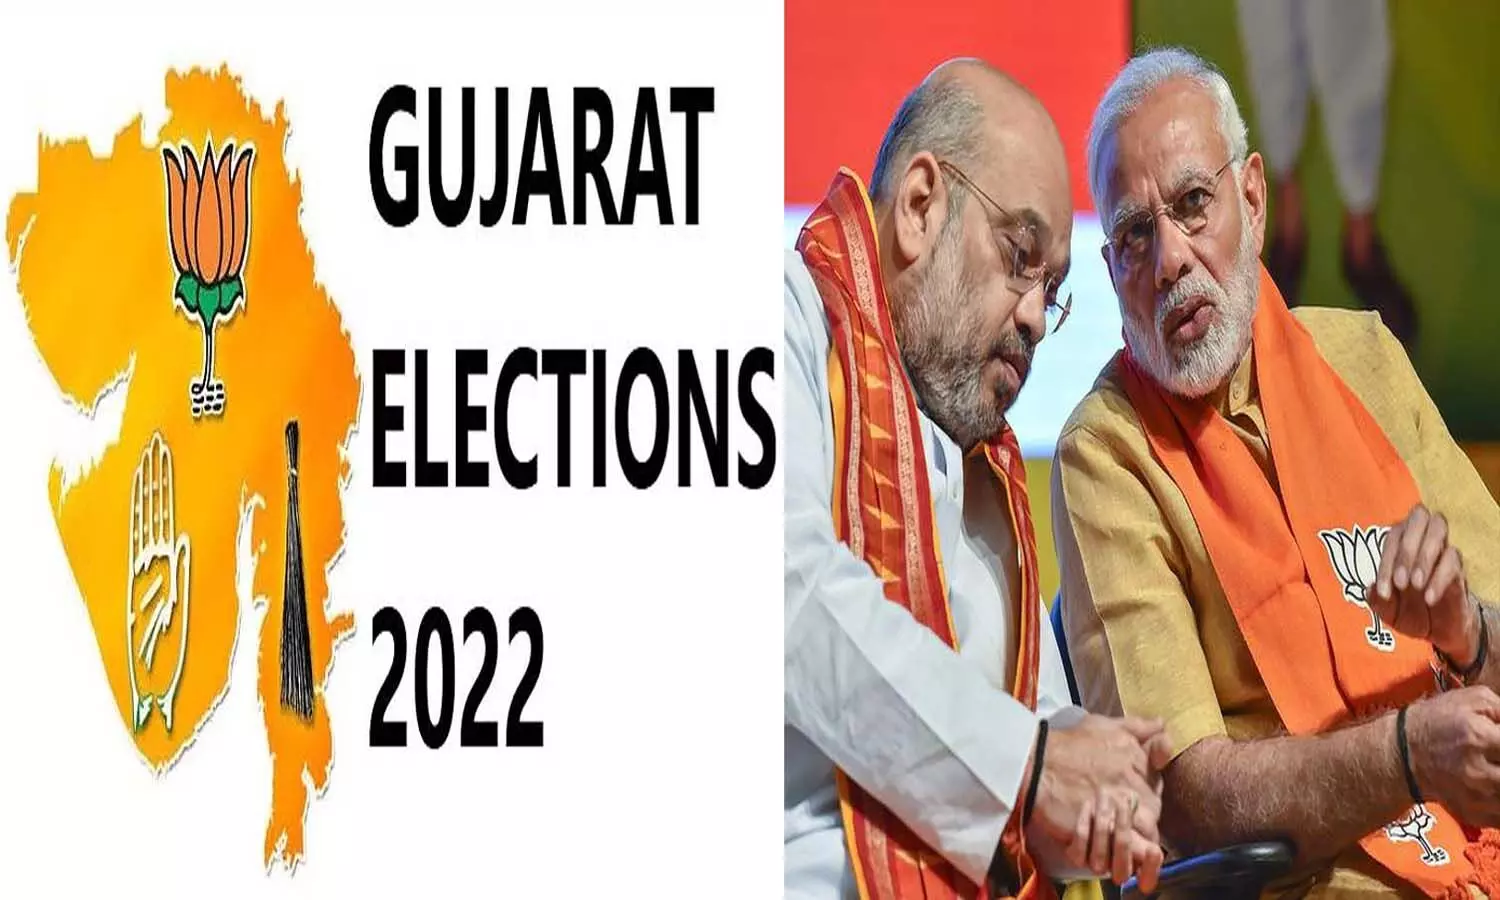 In the second phase of Gujarat, BJP trusts Modi Magic and Shahs diplomacy